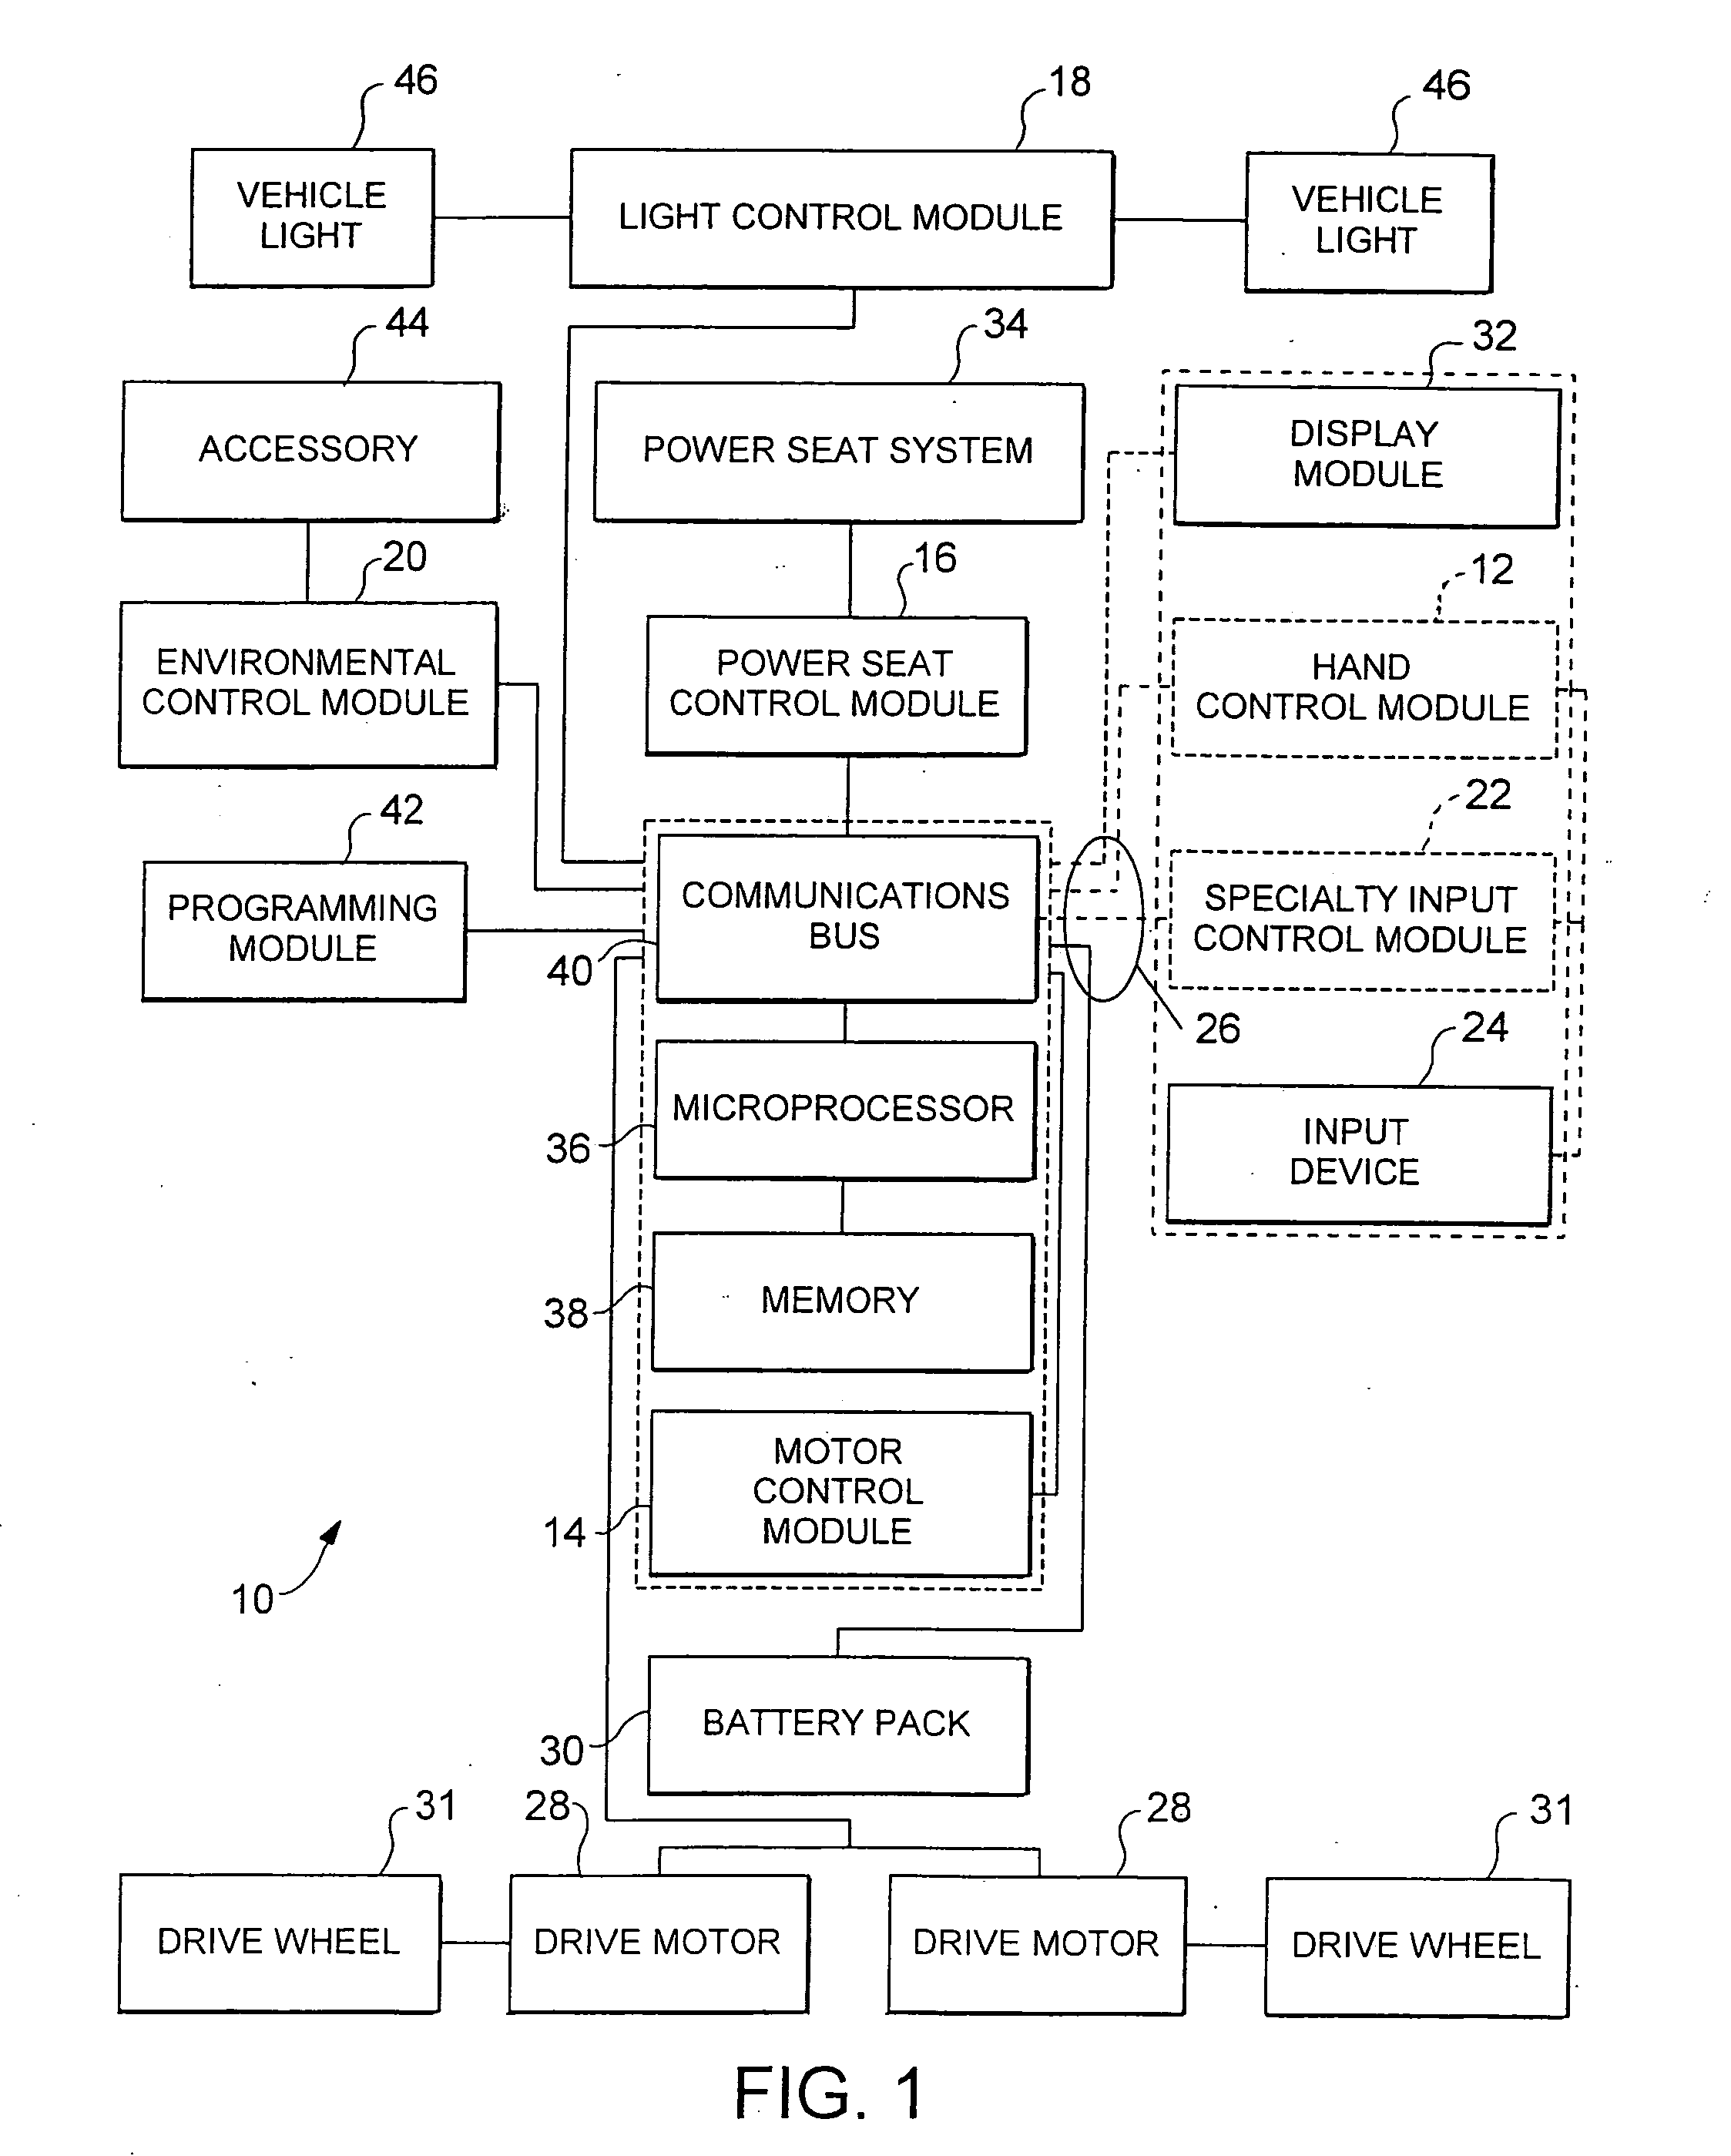 Personal mobility vehicle control system with input functions programmably mapped to output functions